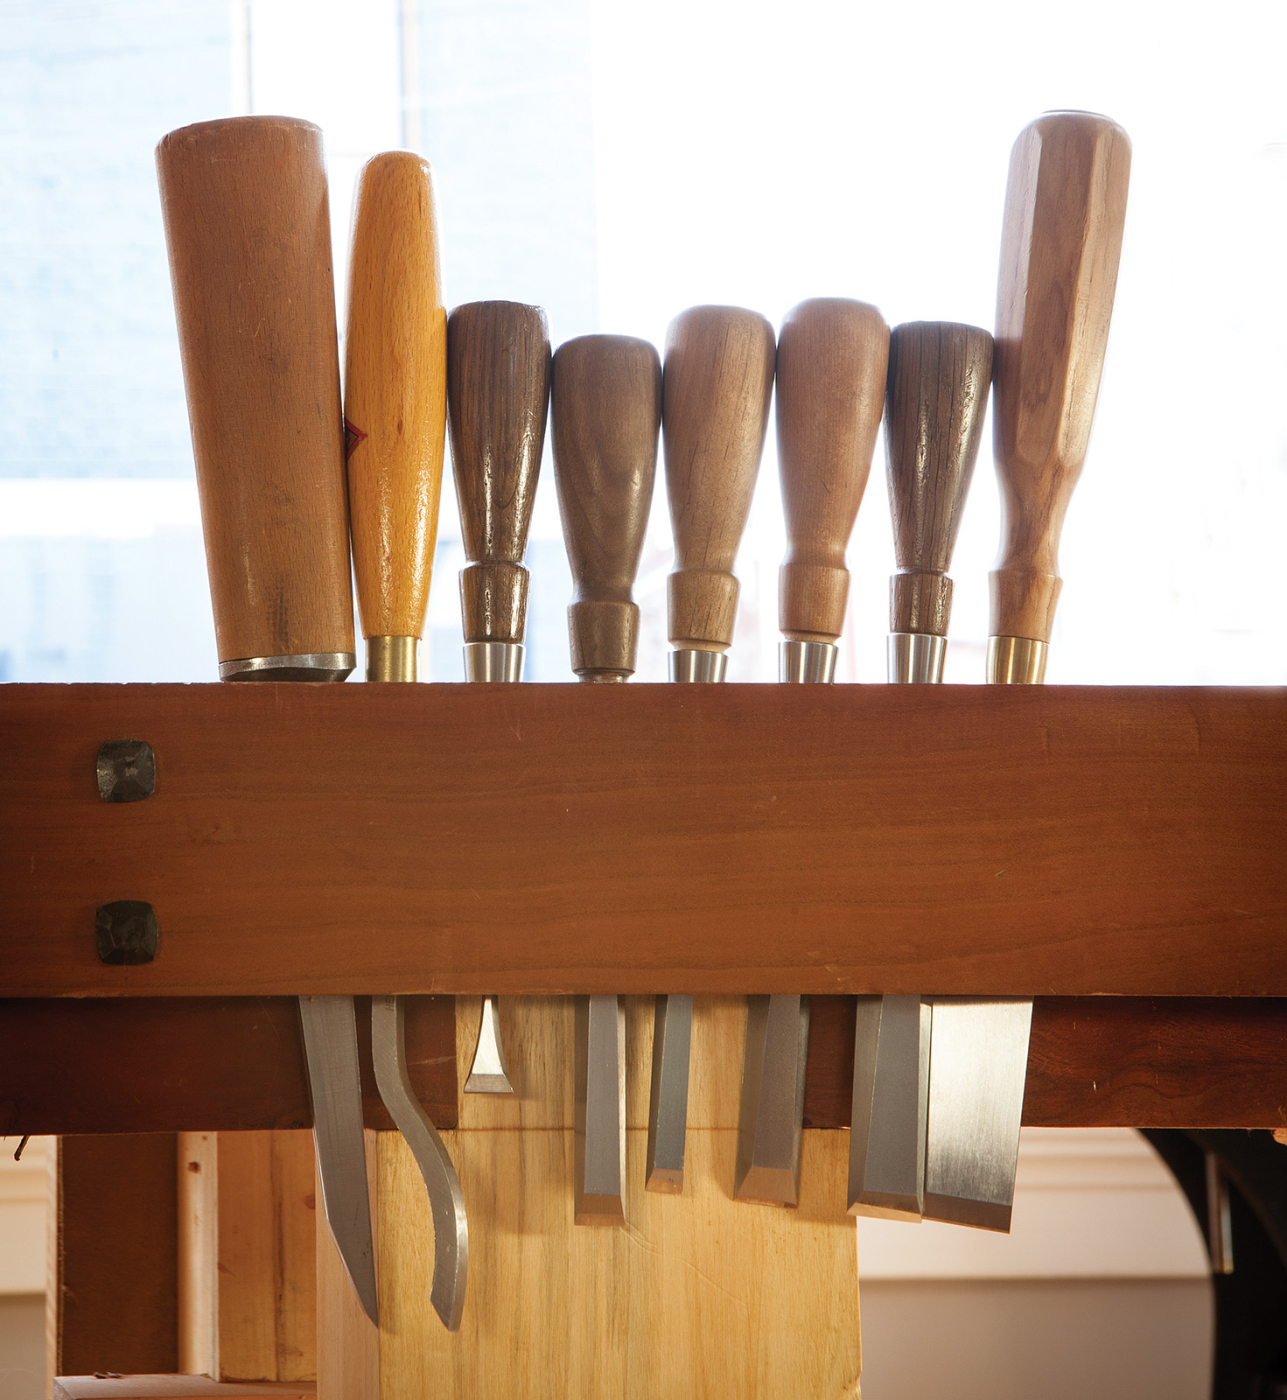 From Novice to Maestro: How Wood Chisels Can Elevate Your Craftsmanship